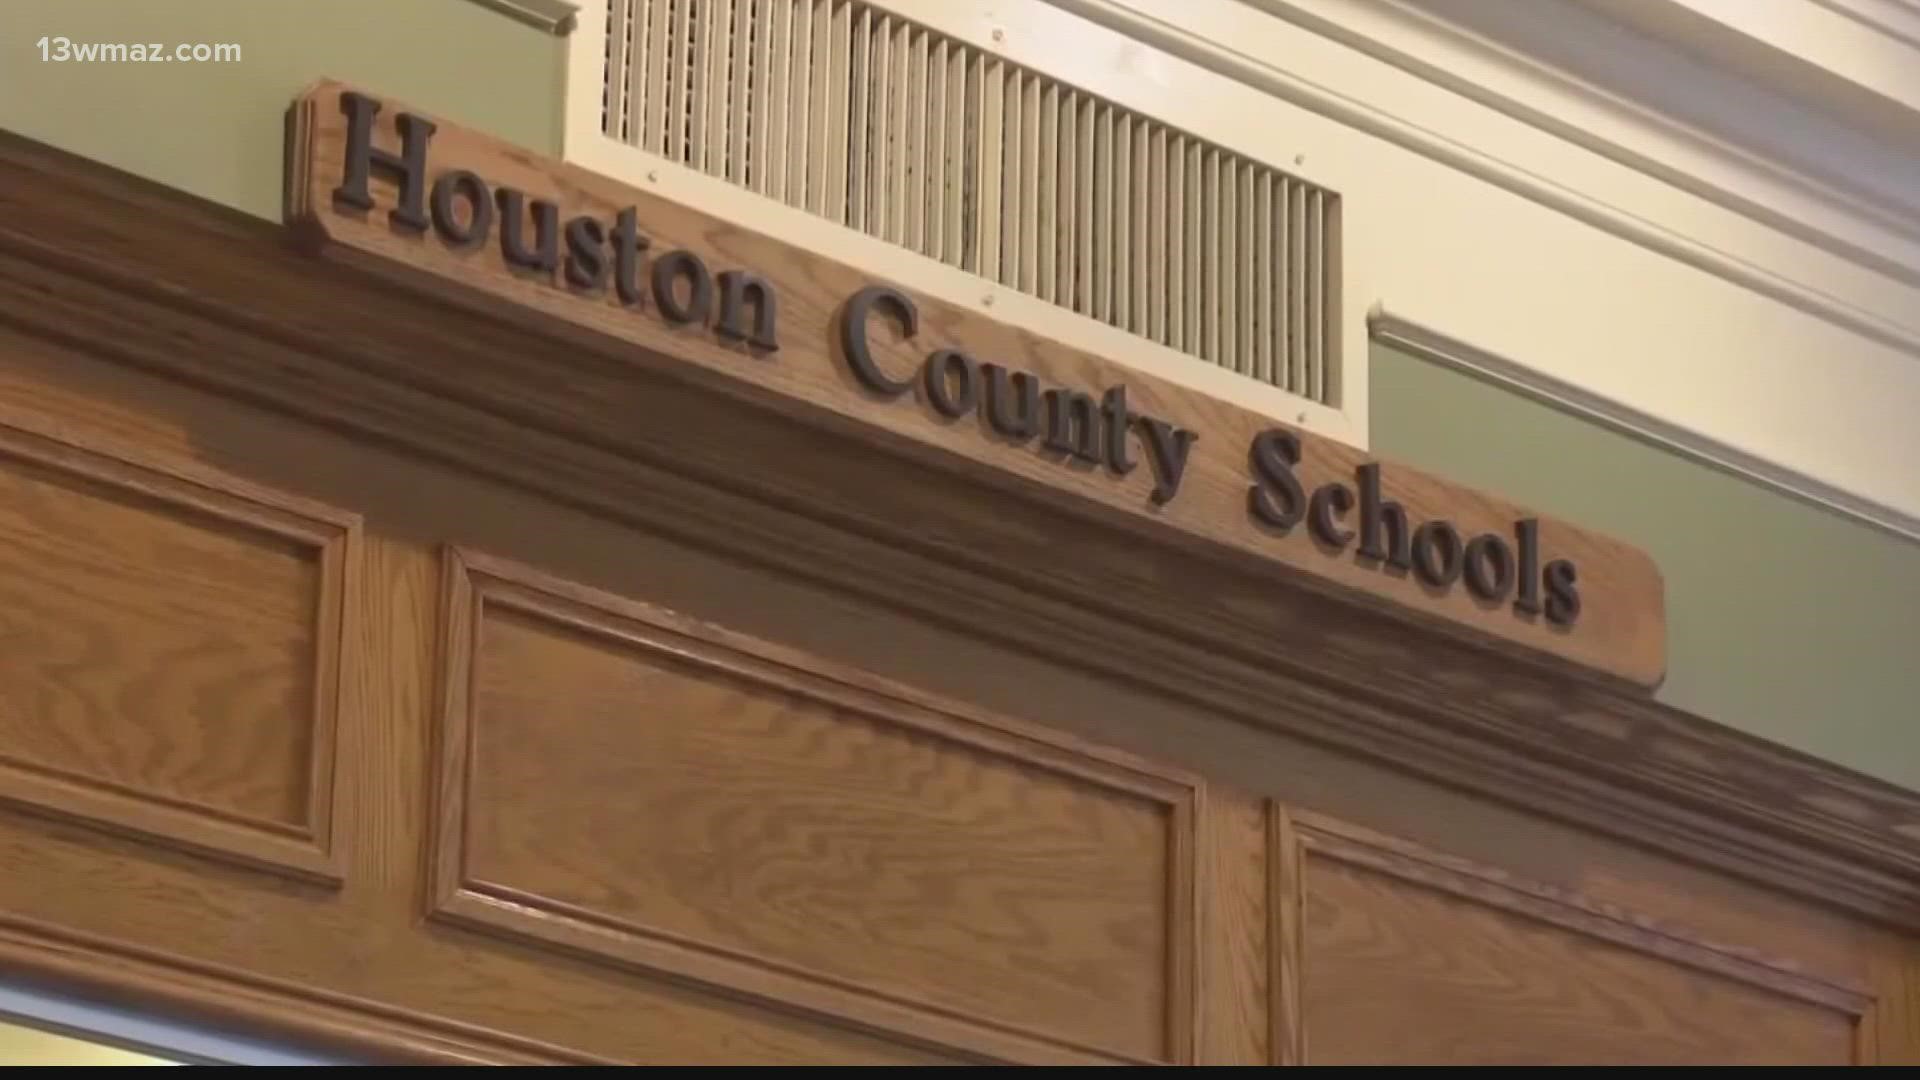 Houston County Schools says according to the district, more than 700 students have tested positive -- 444 just last week.